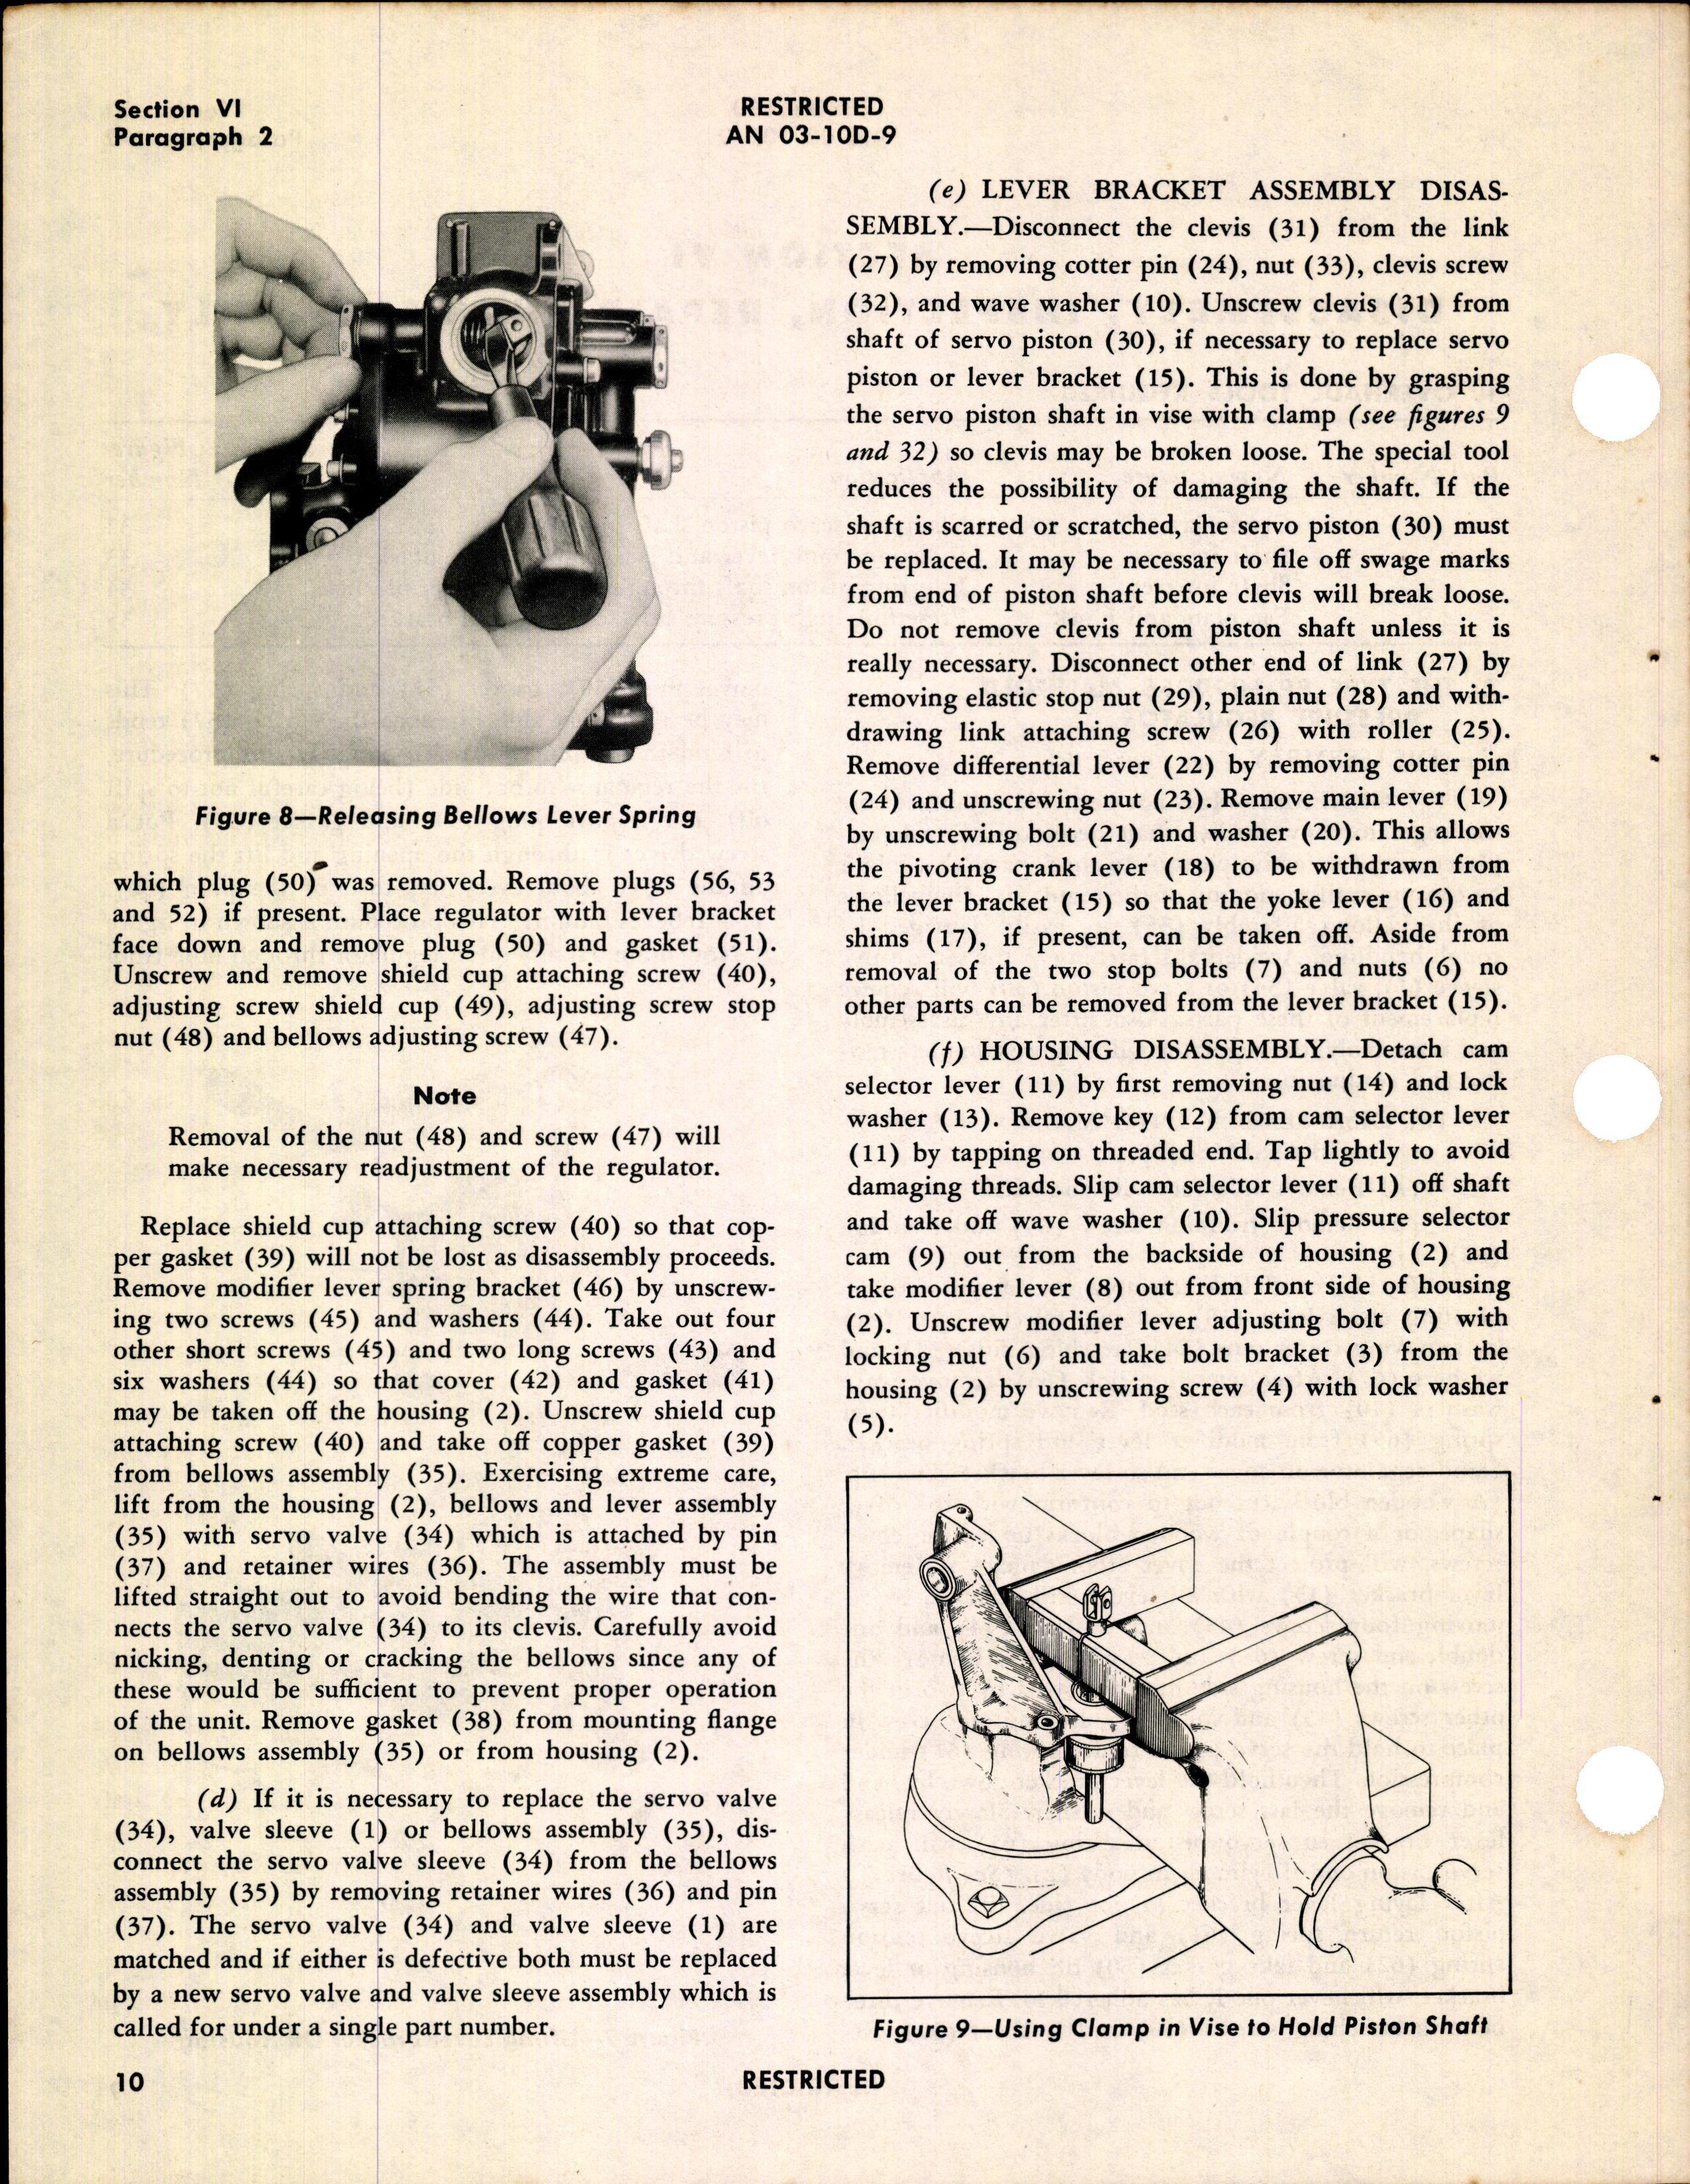 Sample page 16 from AirCorps Library document: Handbook of Instructions with Parts Catalog for Manifold Pressure Regulators